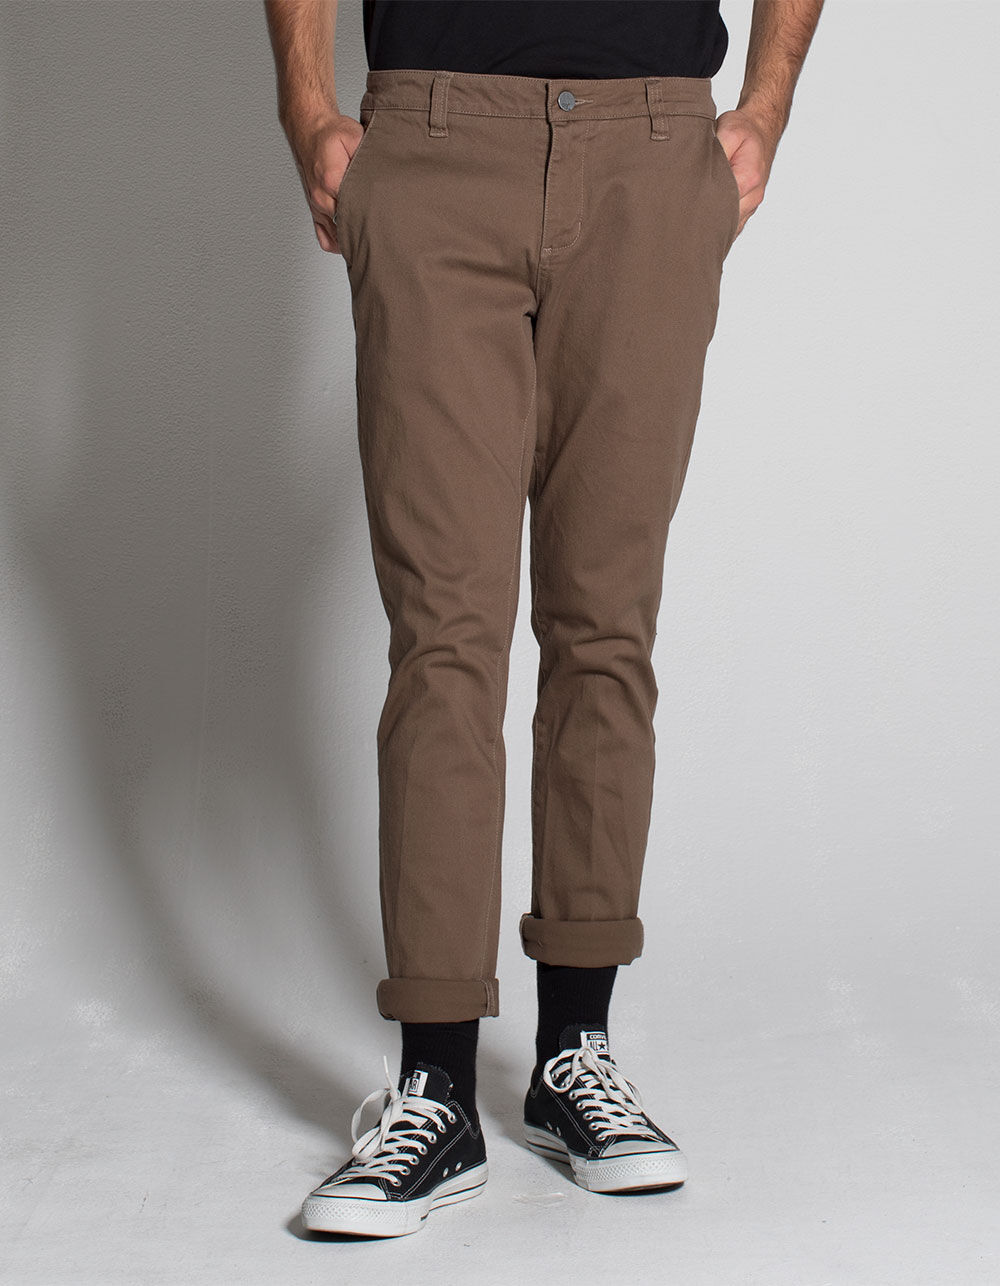 RSQ London Mens Skinny Stretch Chino Pants image number 0